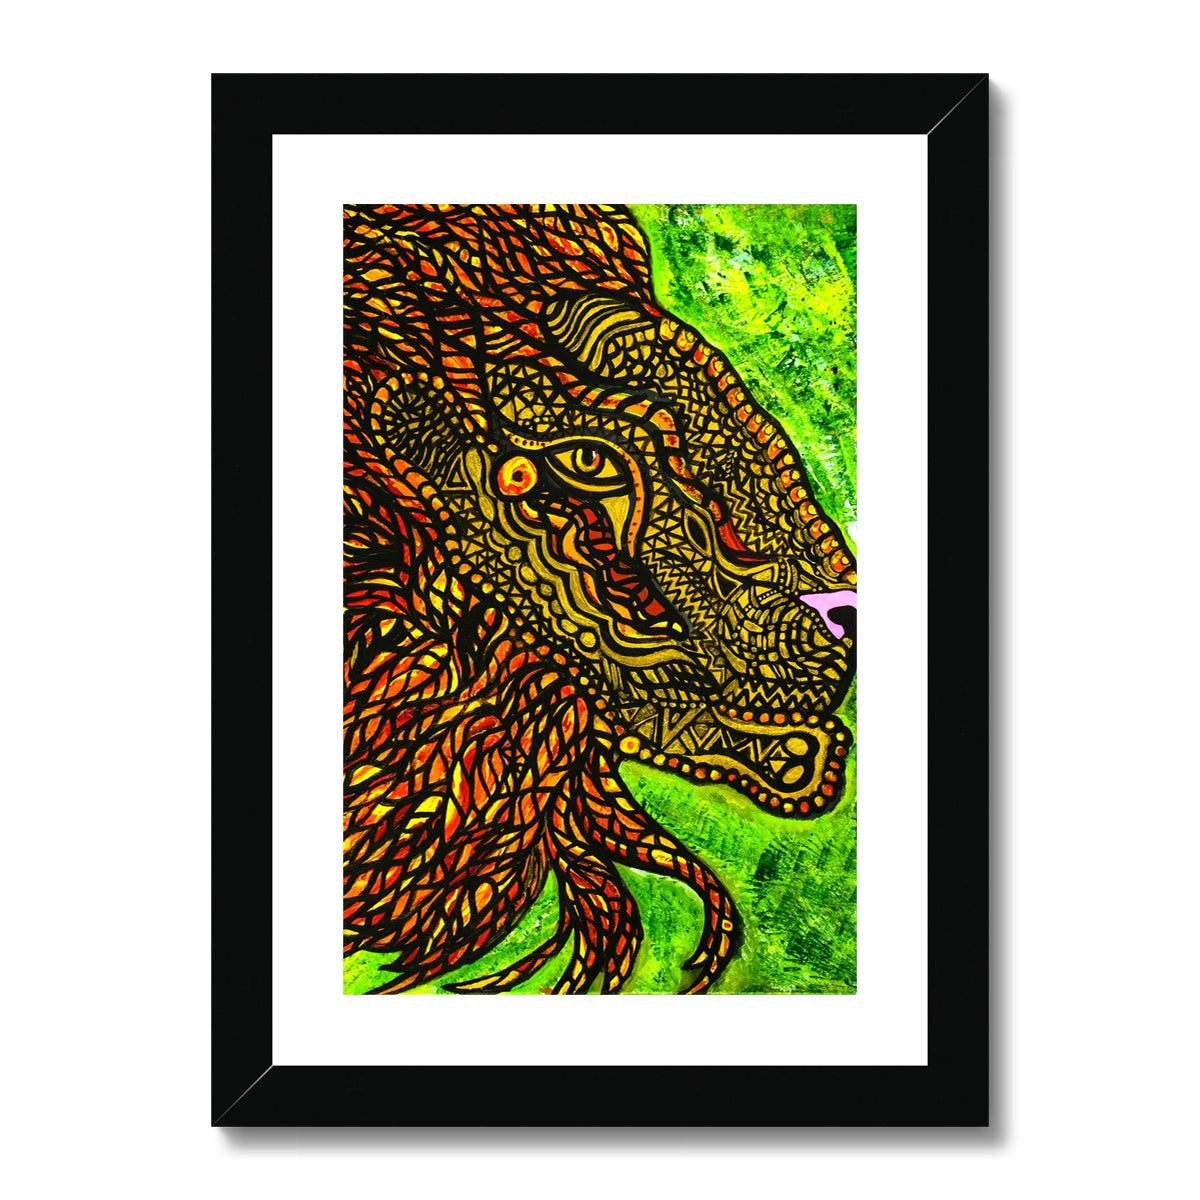 The Lions Match Framed & Mounted Print